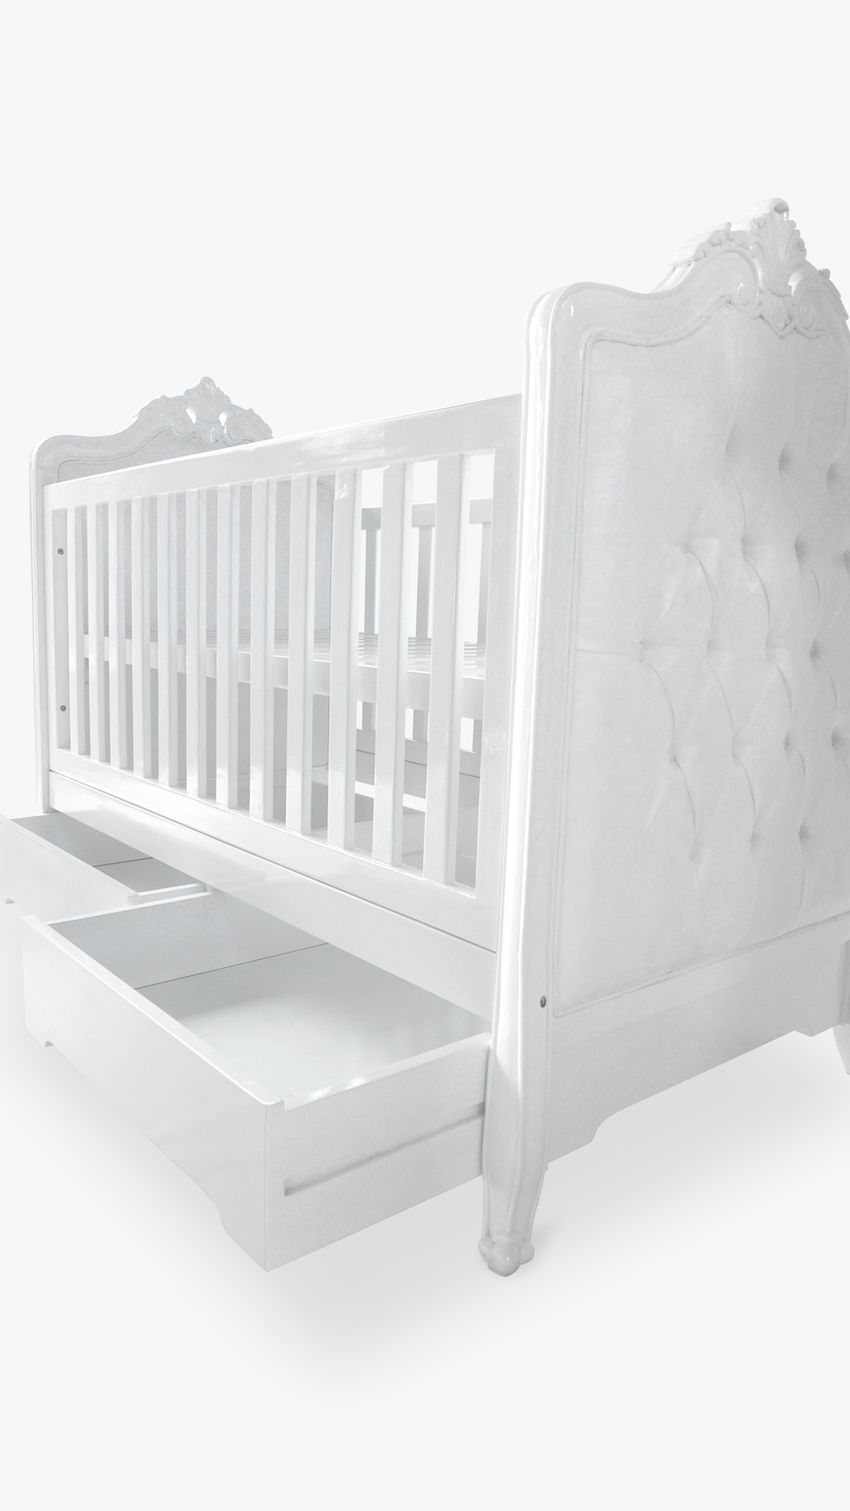 World's First Smart Cot with Built-In iPad